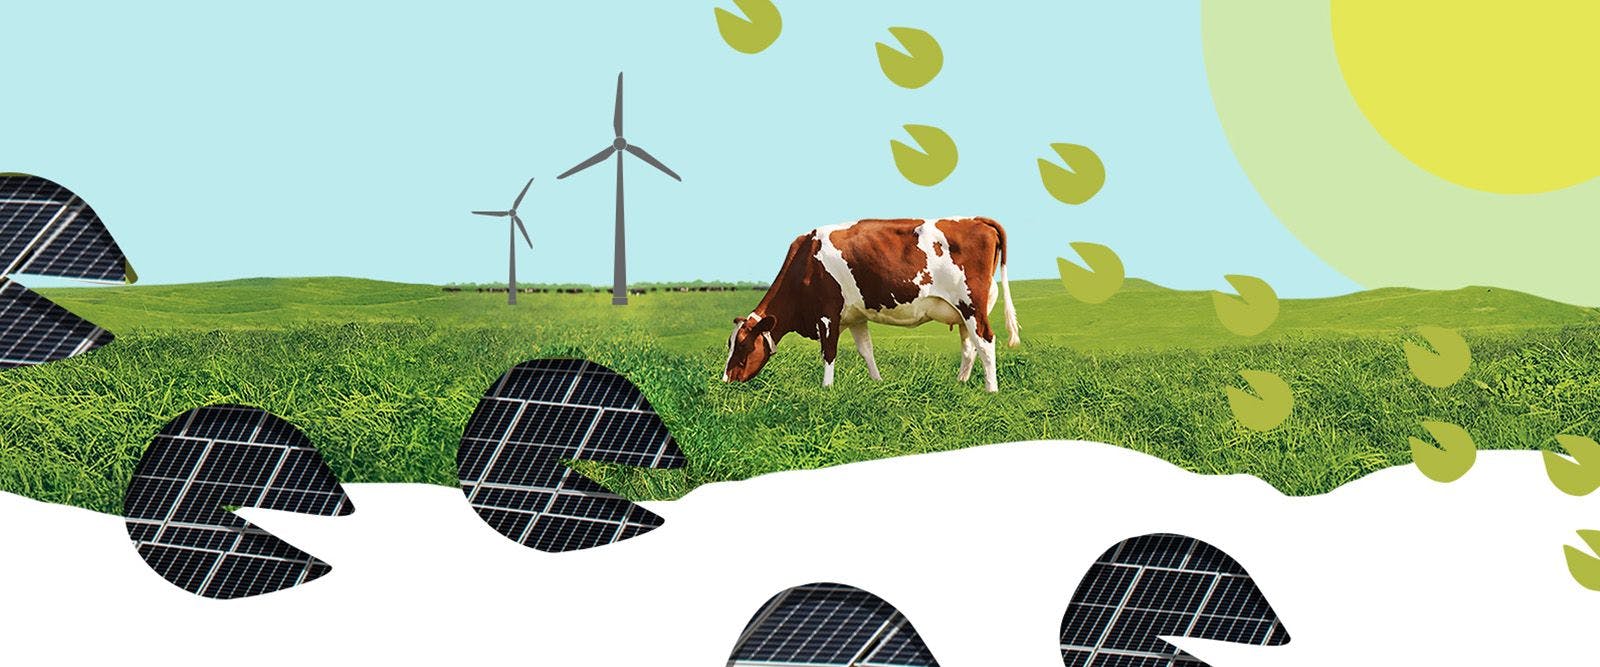  A graphic of a cow grazing near wind turbines.